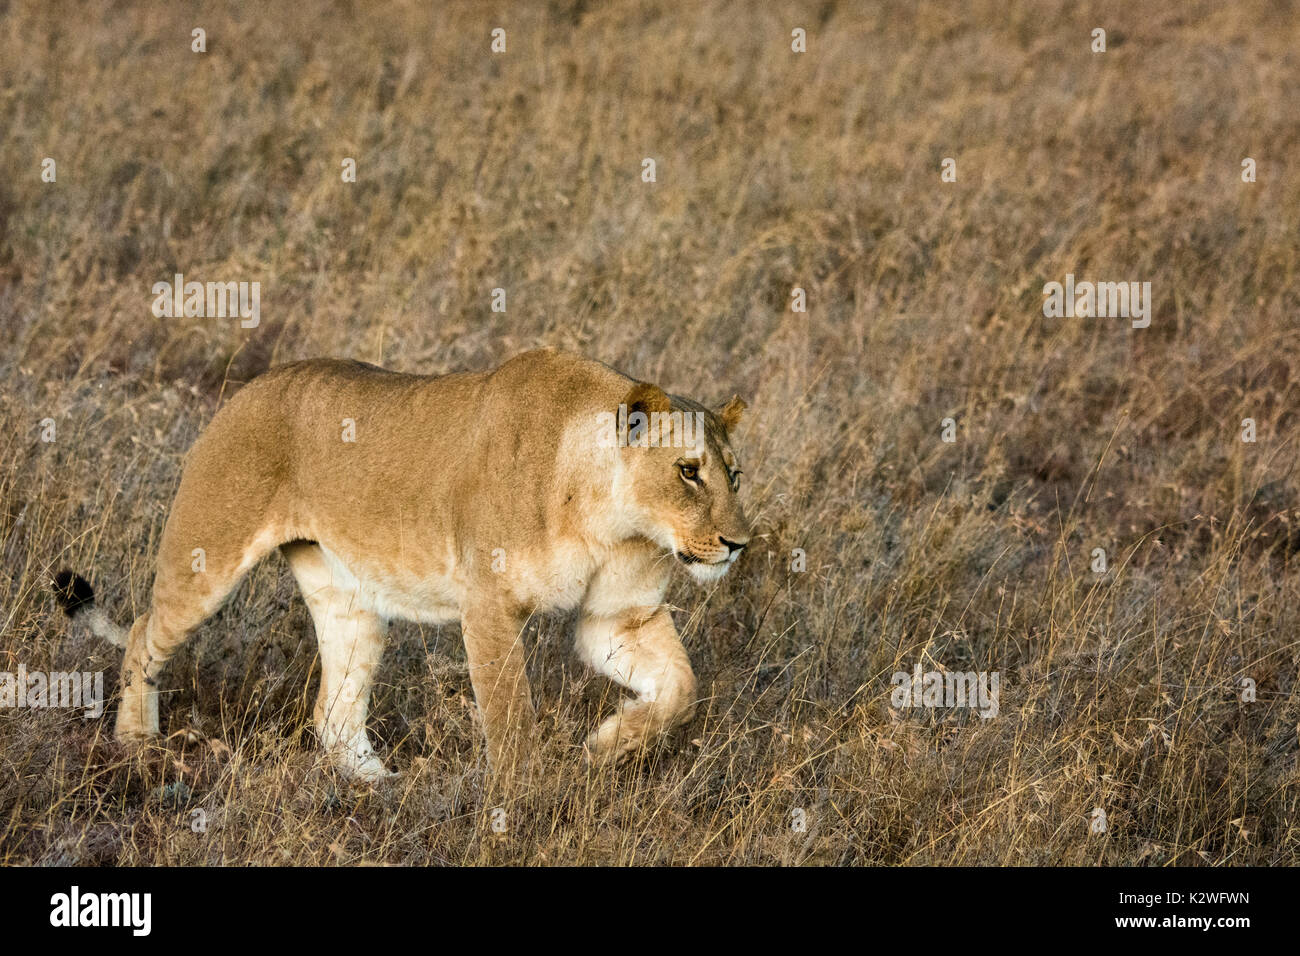 African Lioness, Panthera leo, stalking, hunting in dry grass in Ol Pejeta Conservancy, Northern Kenya, East Africa Stock Photo